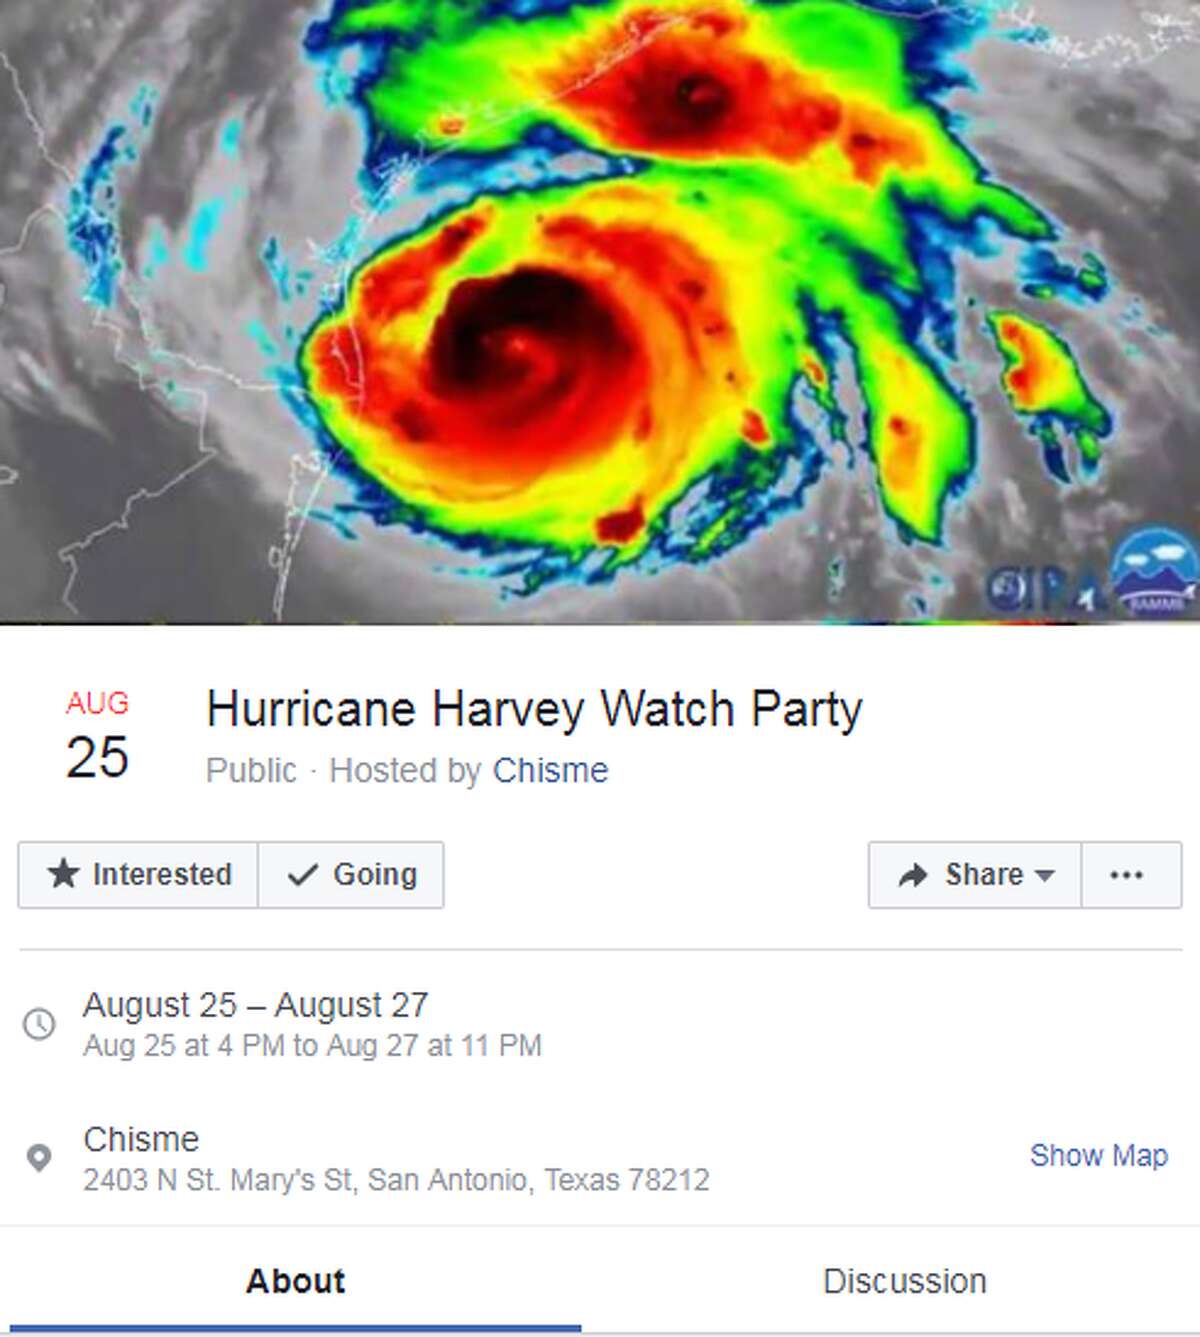 Chisme's Hurricane Harvey Watch Party "Join us at Chisme all weekend for a Hurricane Harvey Watch Party with $7 Hand Crafted Hurricanes and food specials," a Facebook event page reads.